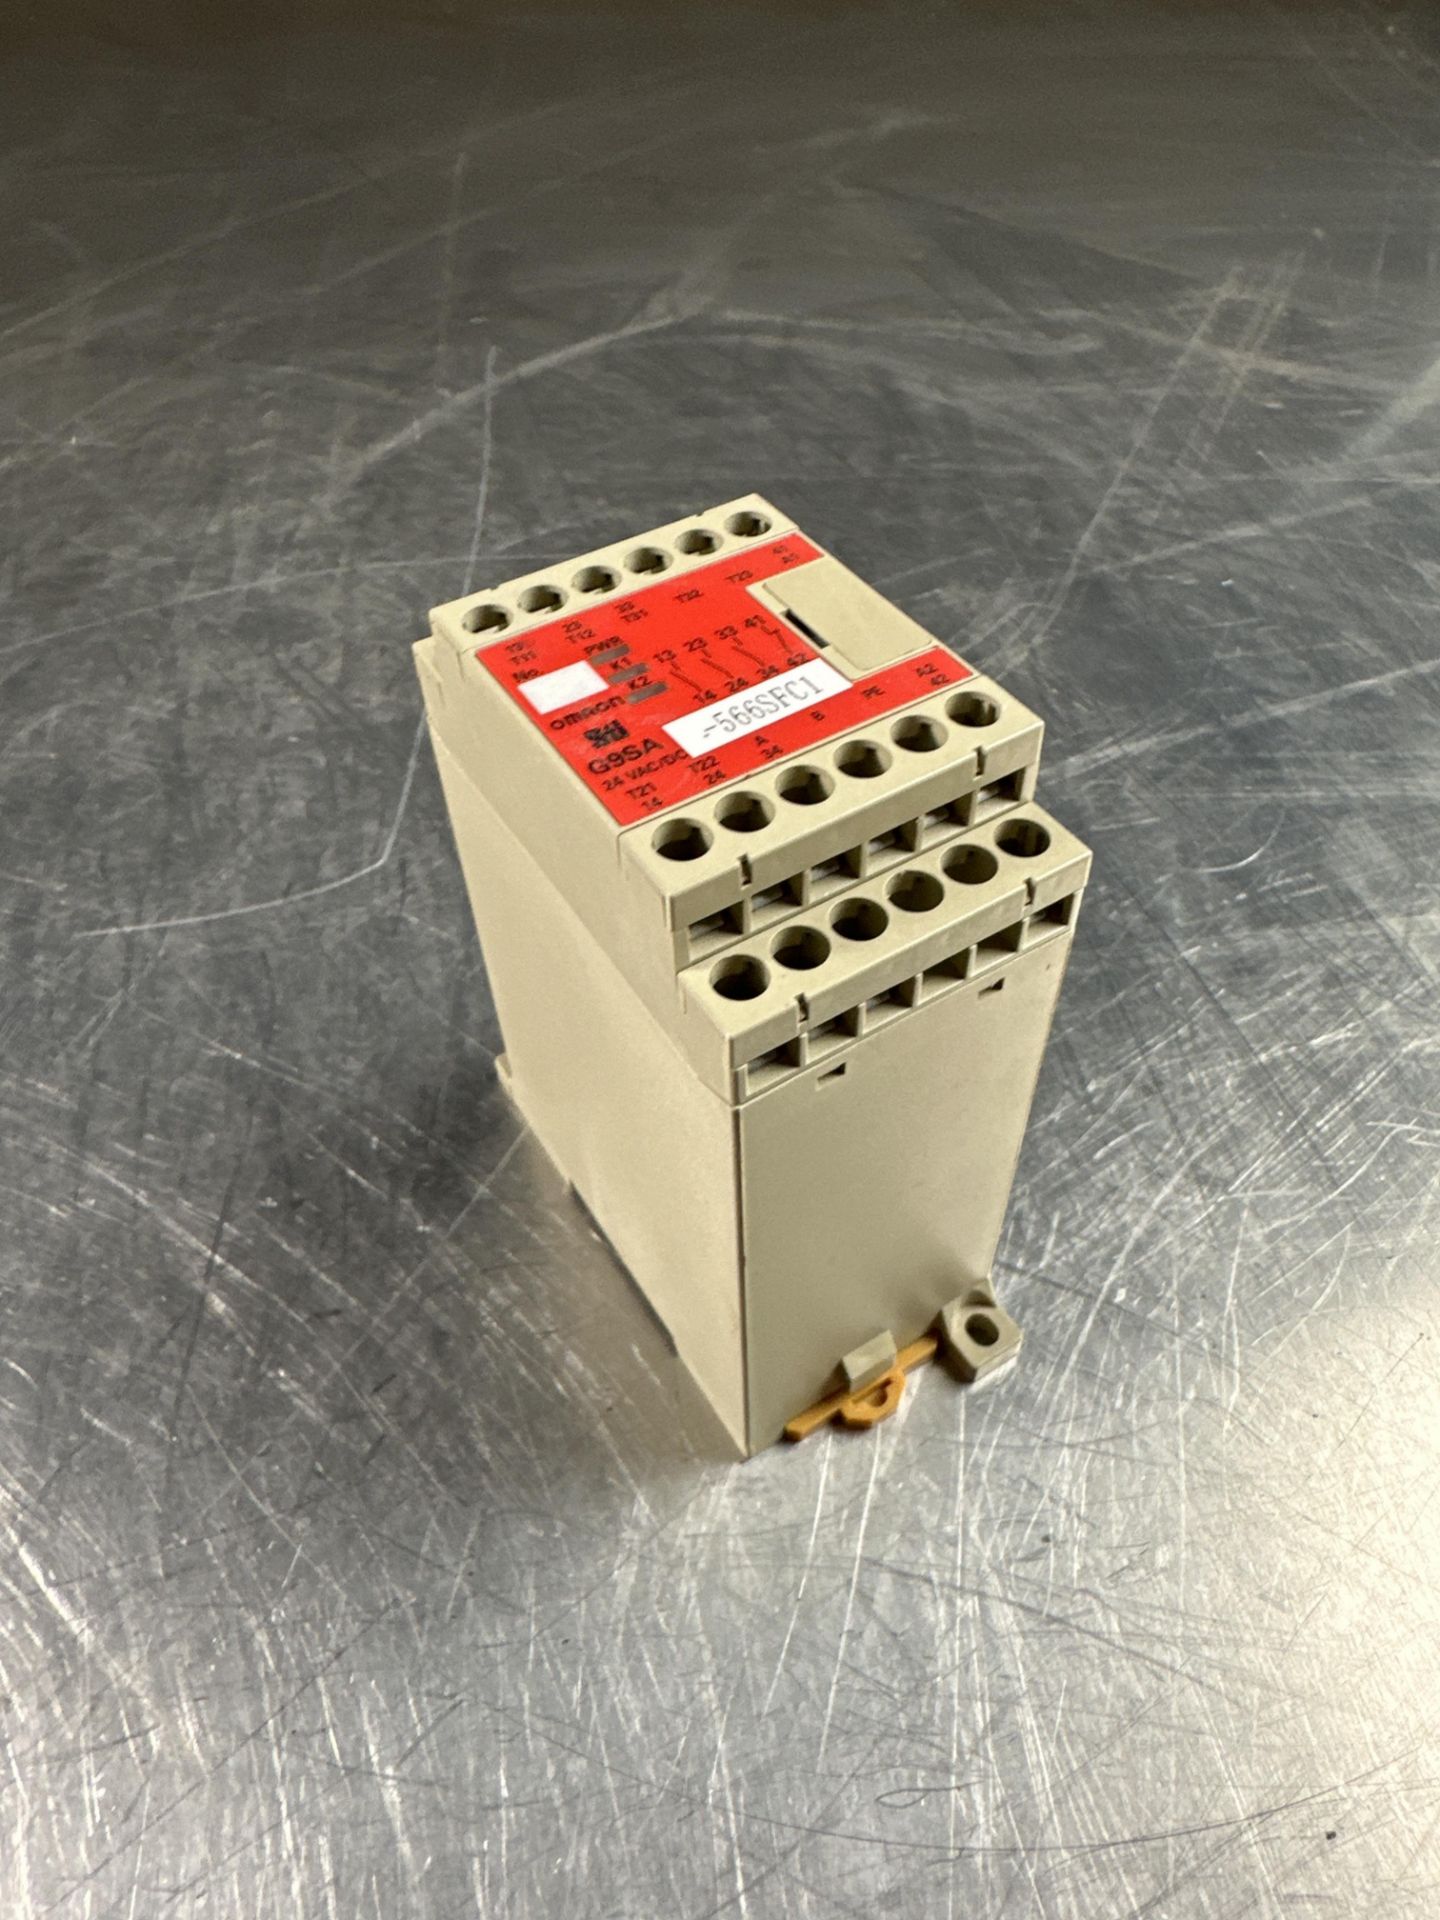 LOT OF 4 OMRON G9SA-301 SAFETY RELAYS - Image 2 of 5